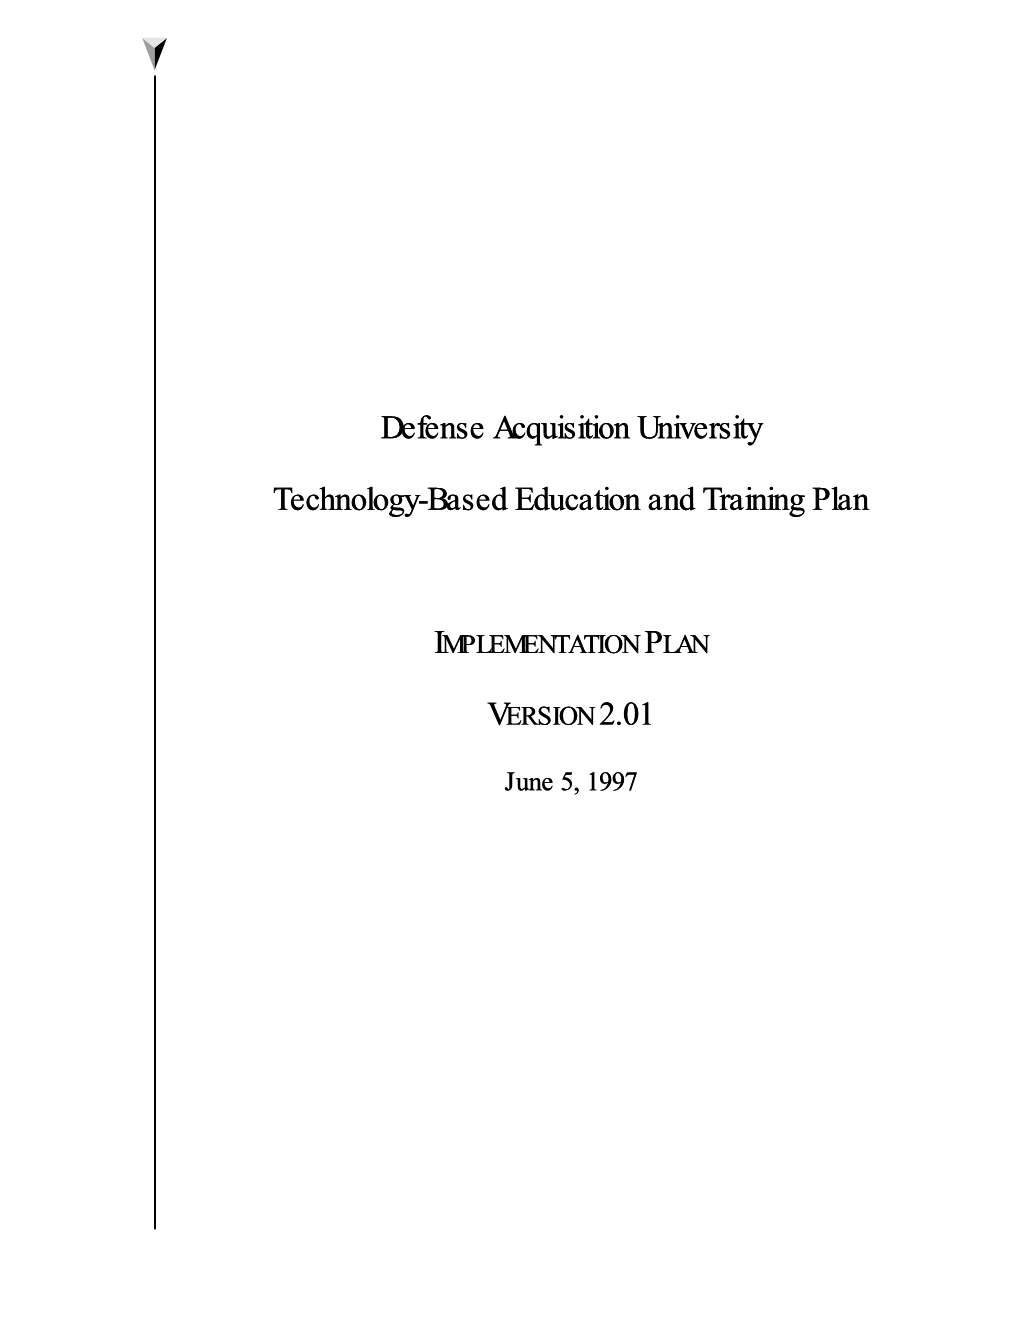 Defense Acquisition University Technology-Based Education And